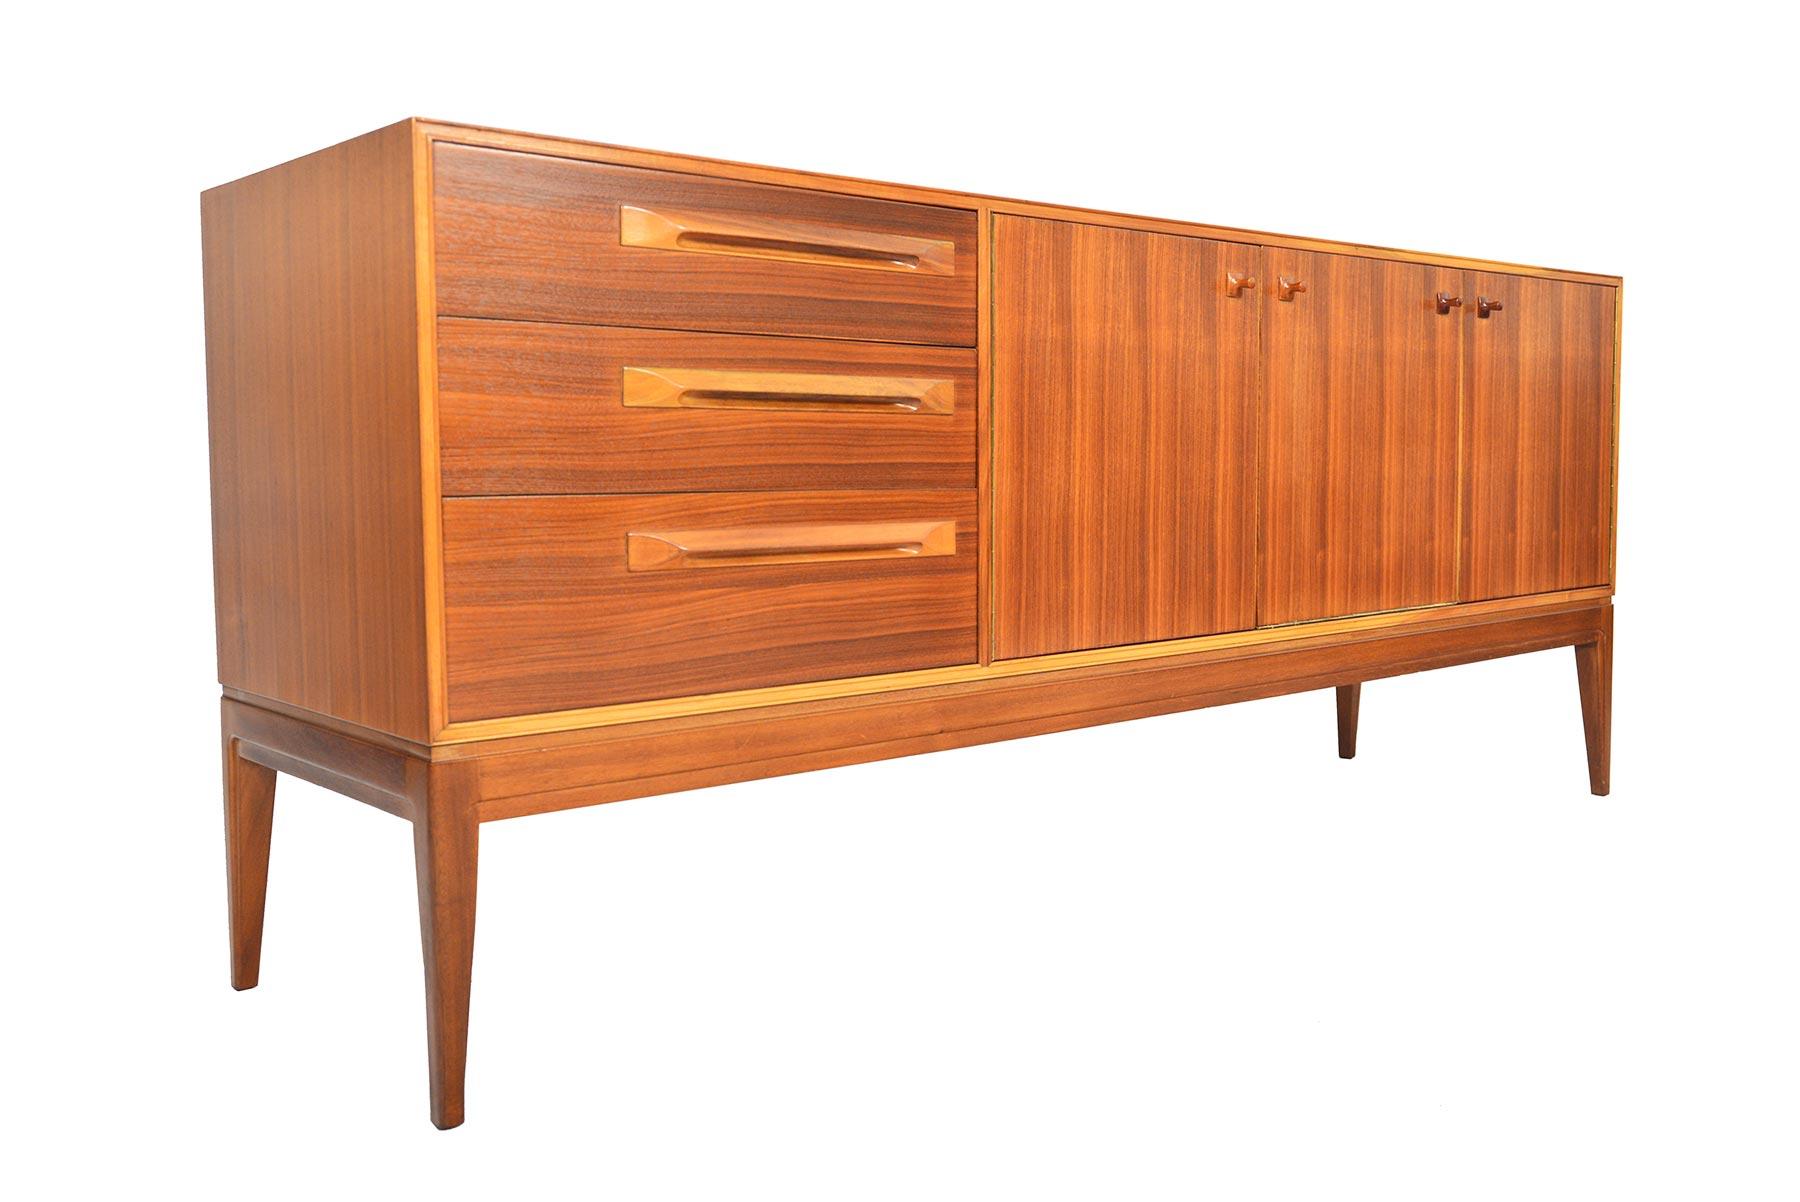 20th Century Refinished A.H. McIntosh Tola and Teak Credenza